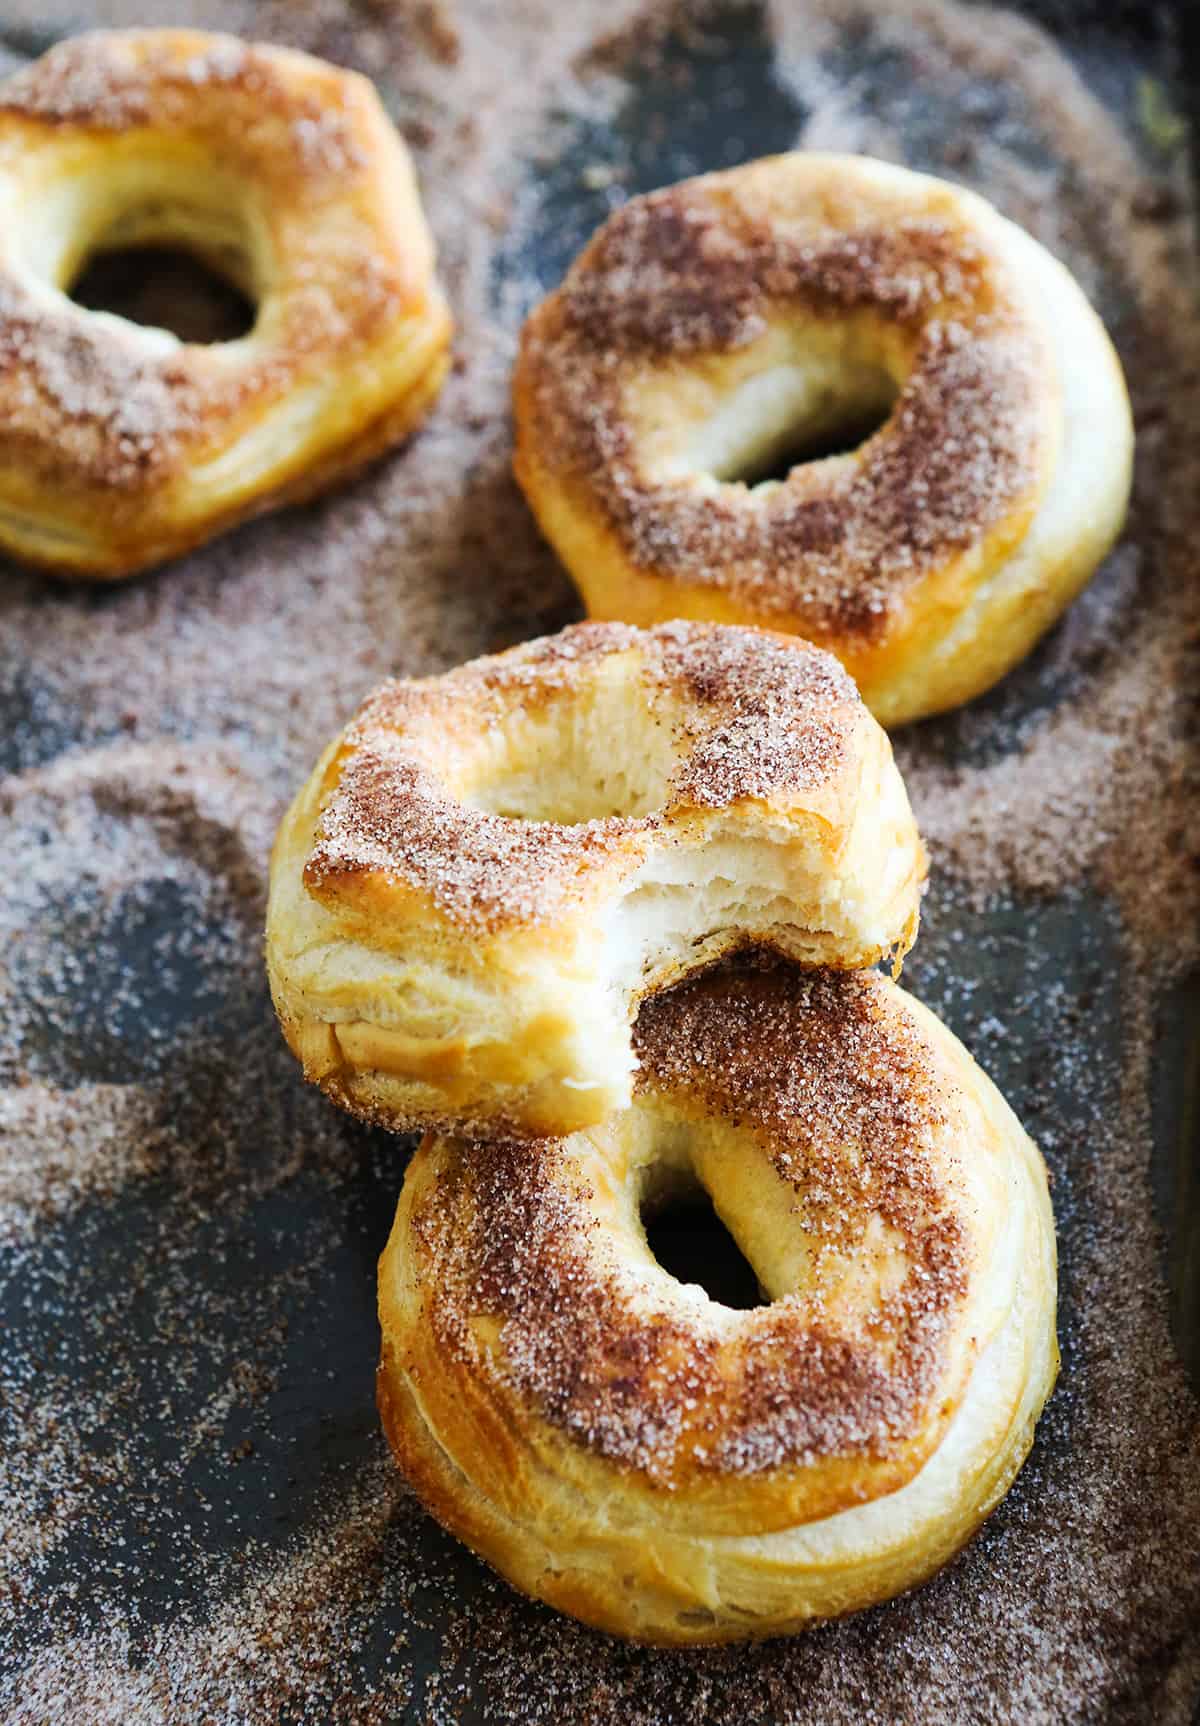 cinnamon sugar air fryer biscuit donuts in sugar mixture, one with bite taken out.